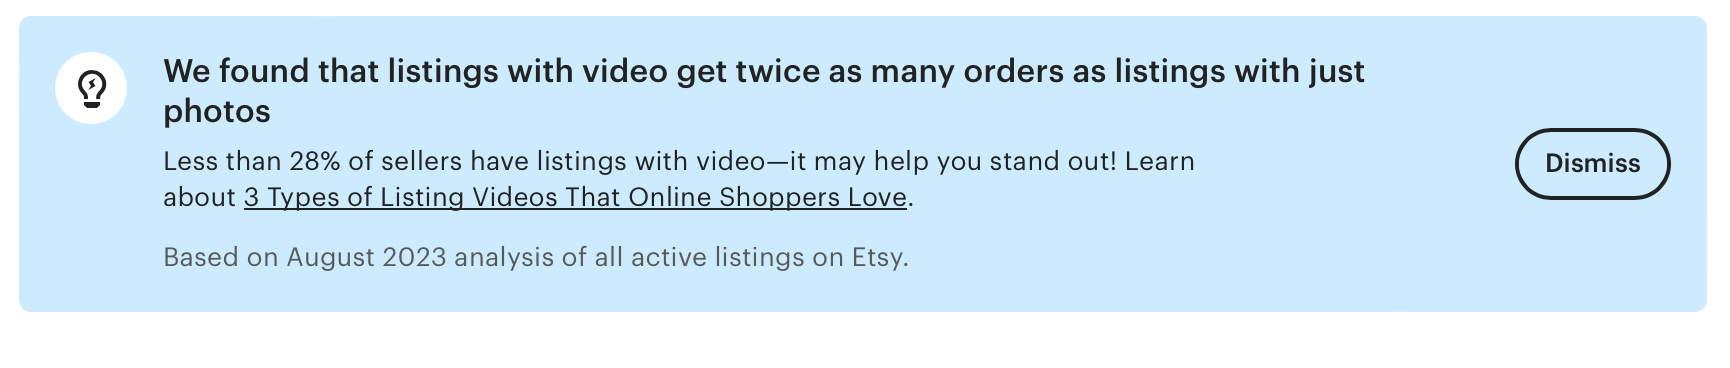 In 2024, Etsy share's its finding that listings with video get 2x as many orders as listings with just photos and YET less than 28% of sellers have listings with video.